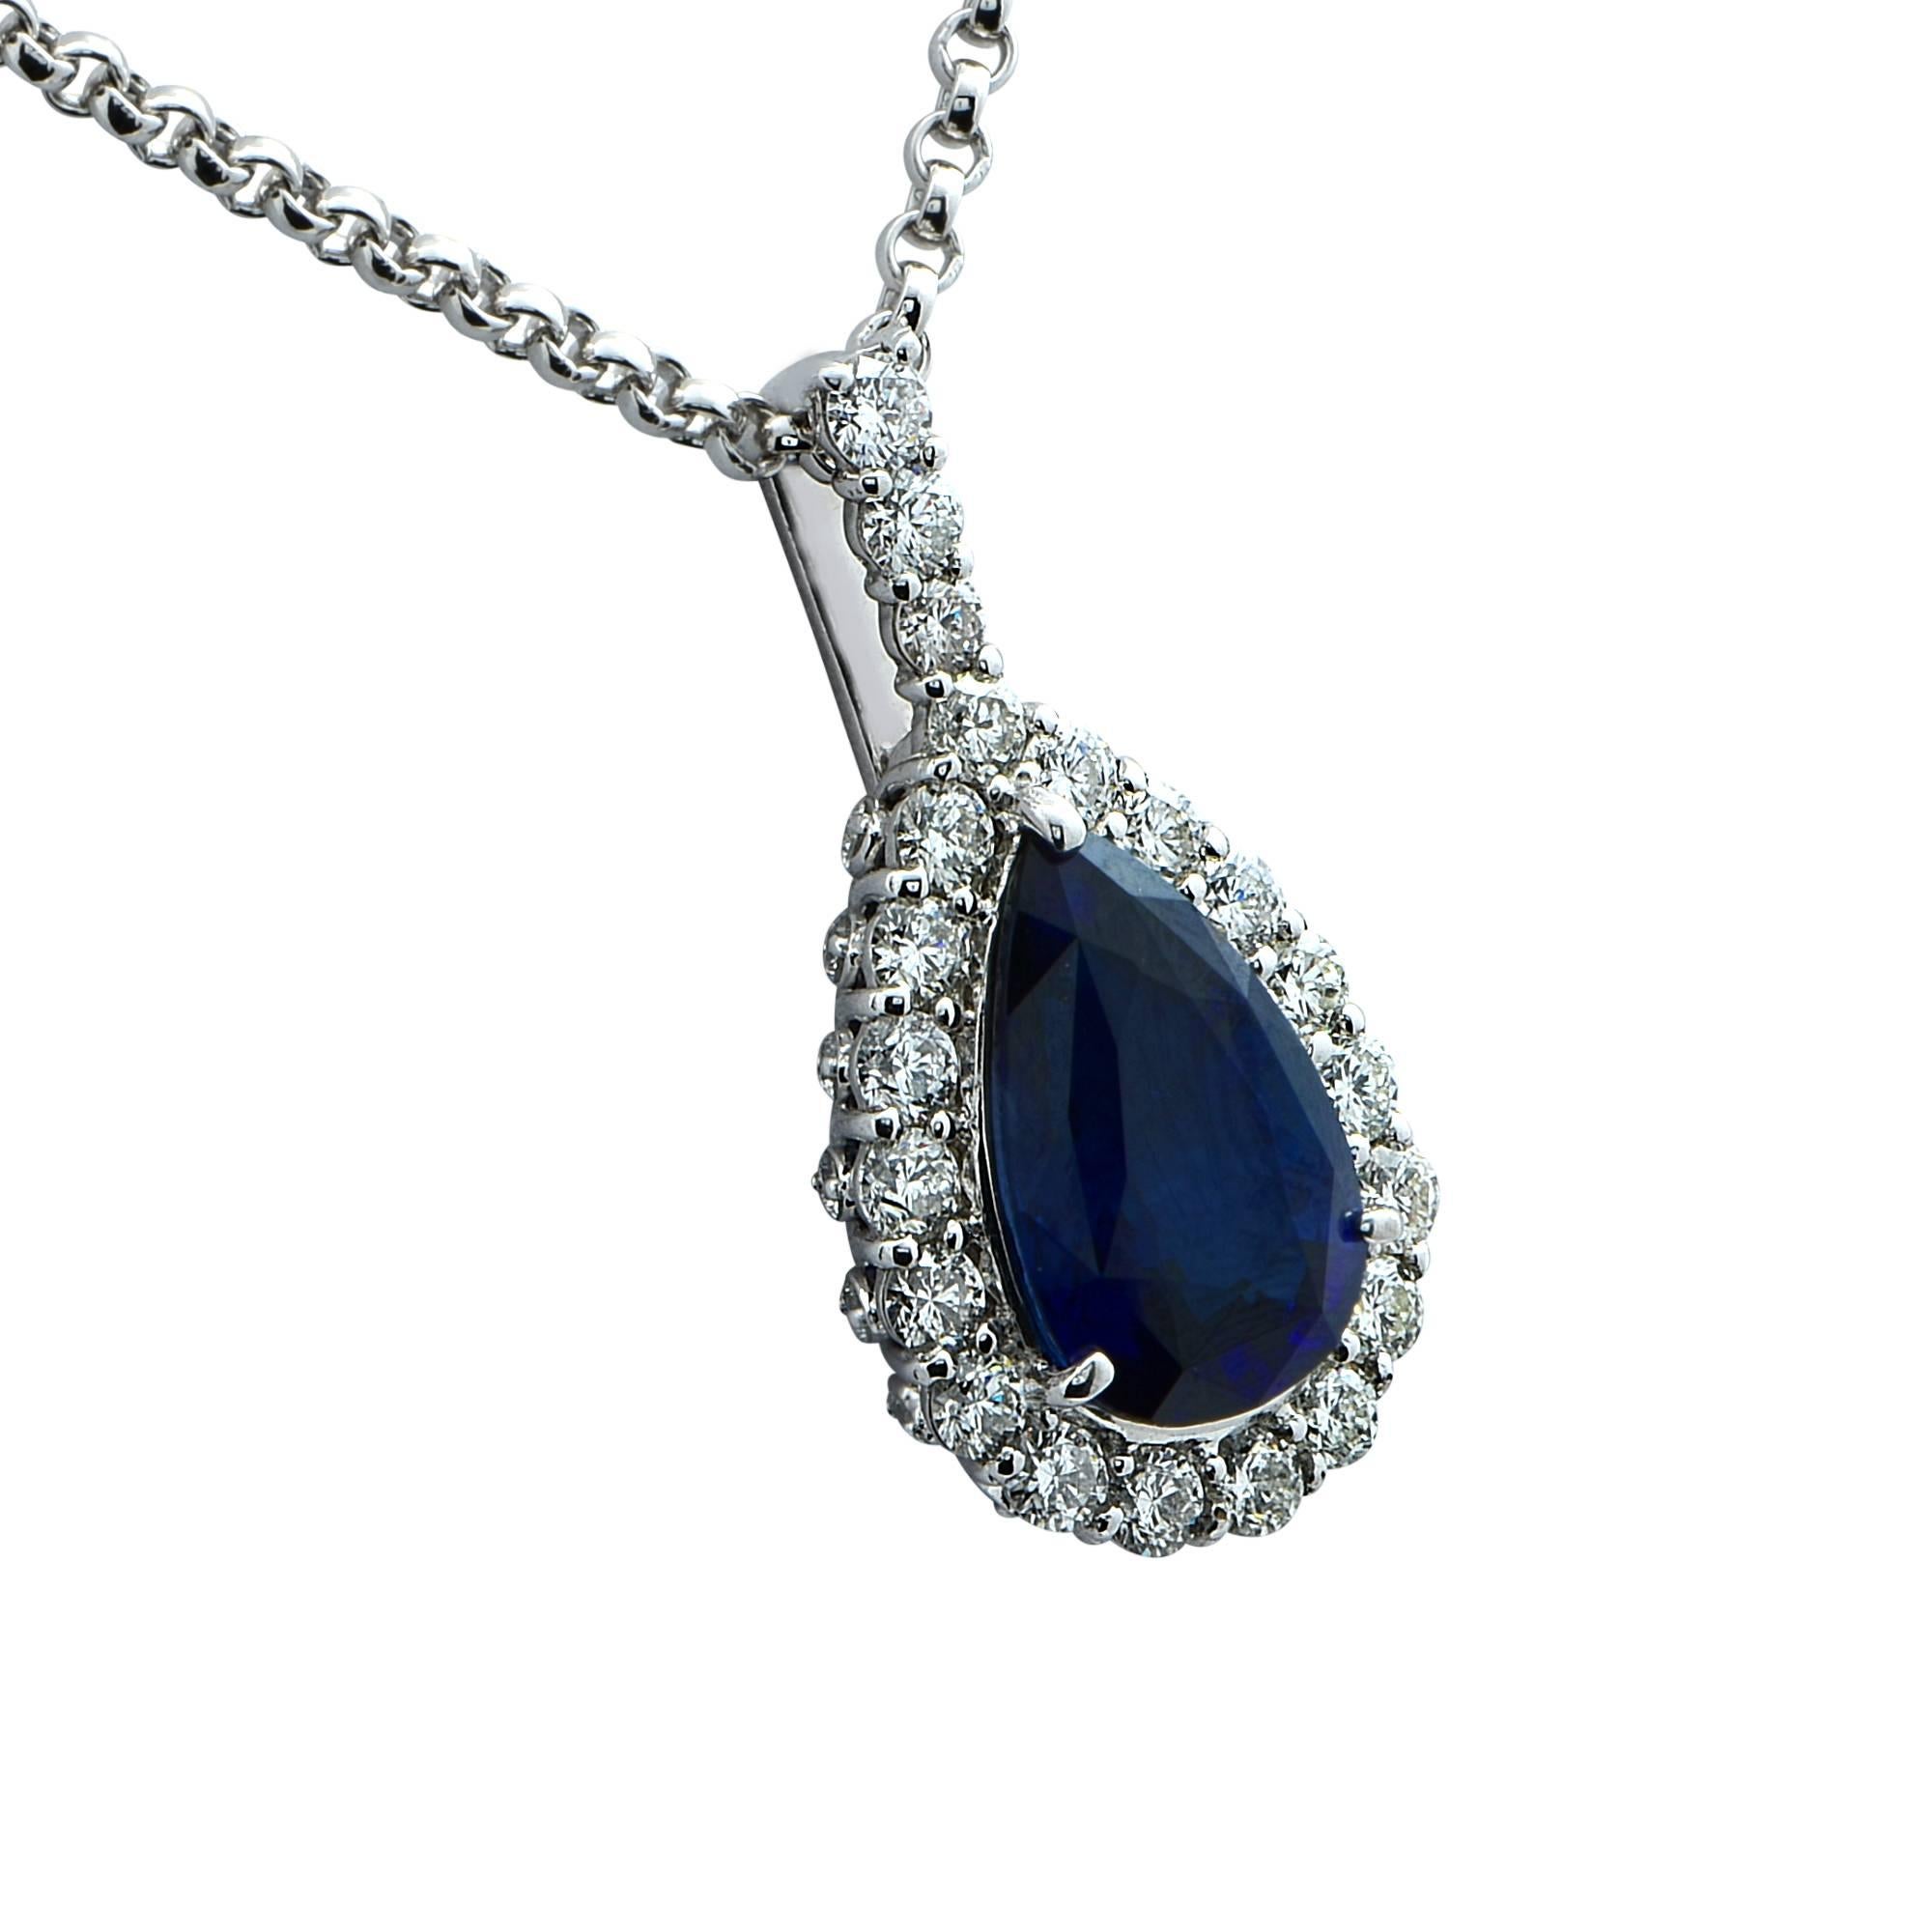 Majestic rich blue pear shape sapphire weighing 10.23 carats, framed in 21 round brilliant cut diamonds, F color, VS quality set in 18 karat white gold, and suspended from a 16 inch 18 karat white gold rolo chain with a crab claw closure. The